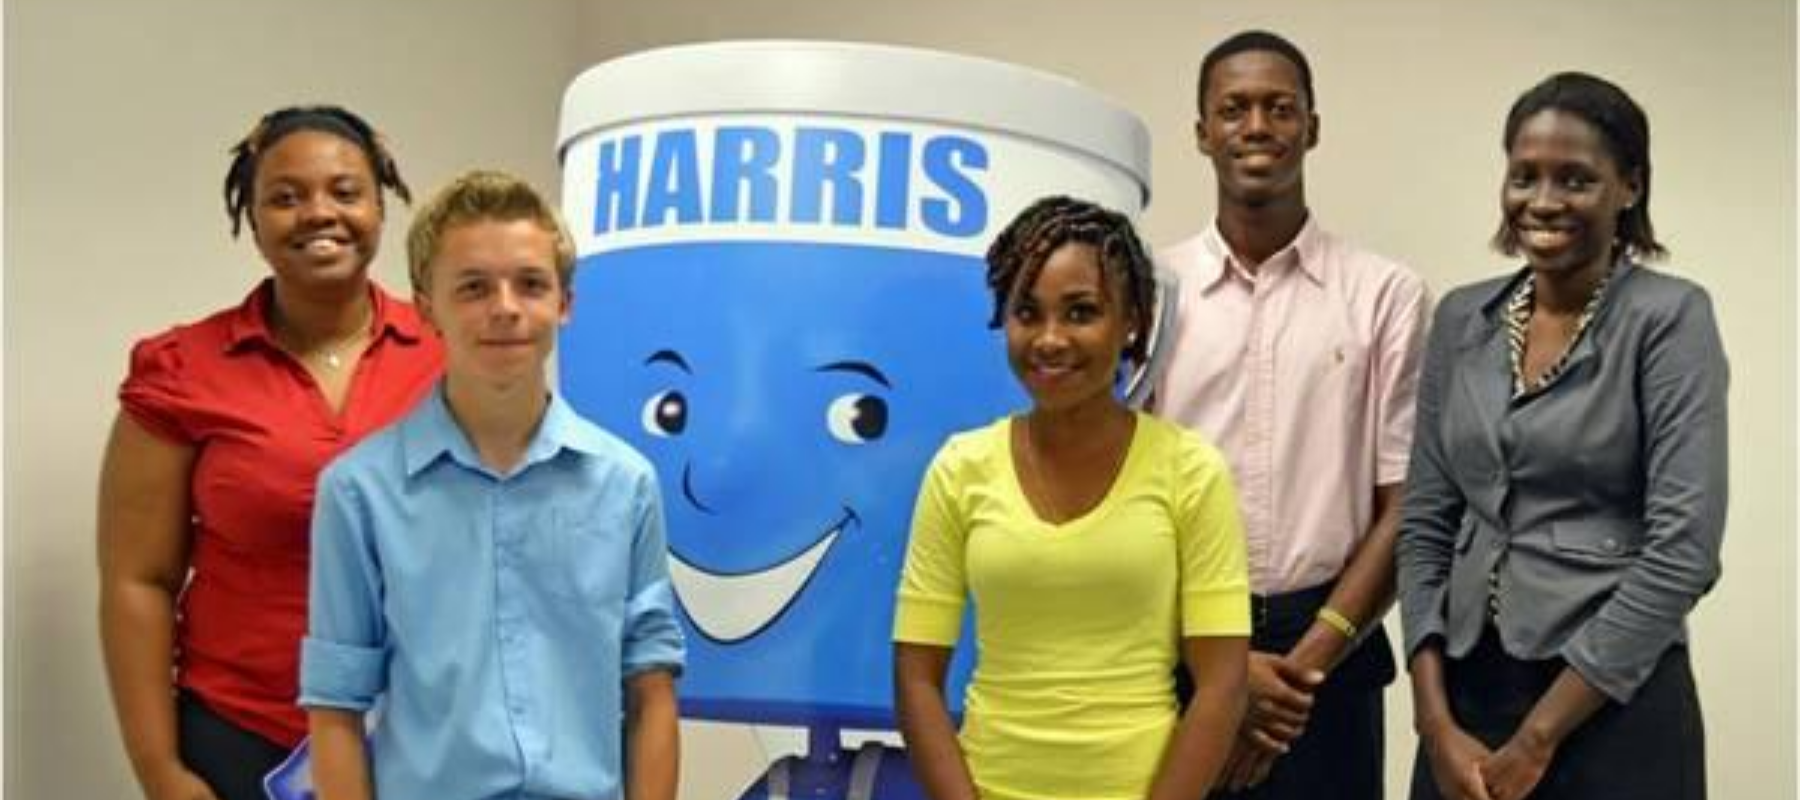 Harris Paints Remains a Champion in Building Careers across the Caribbean